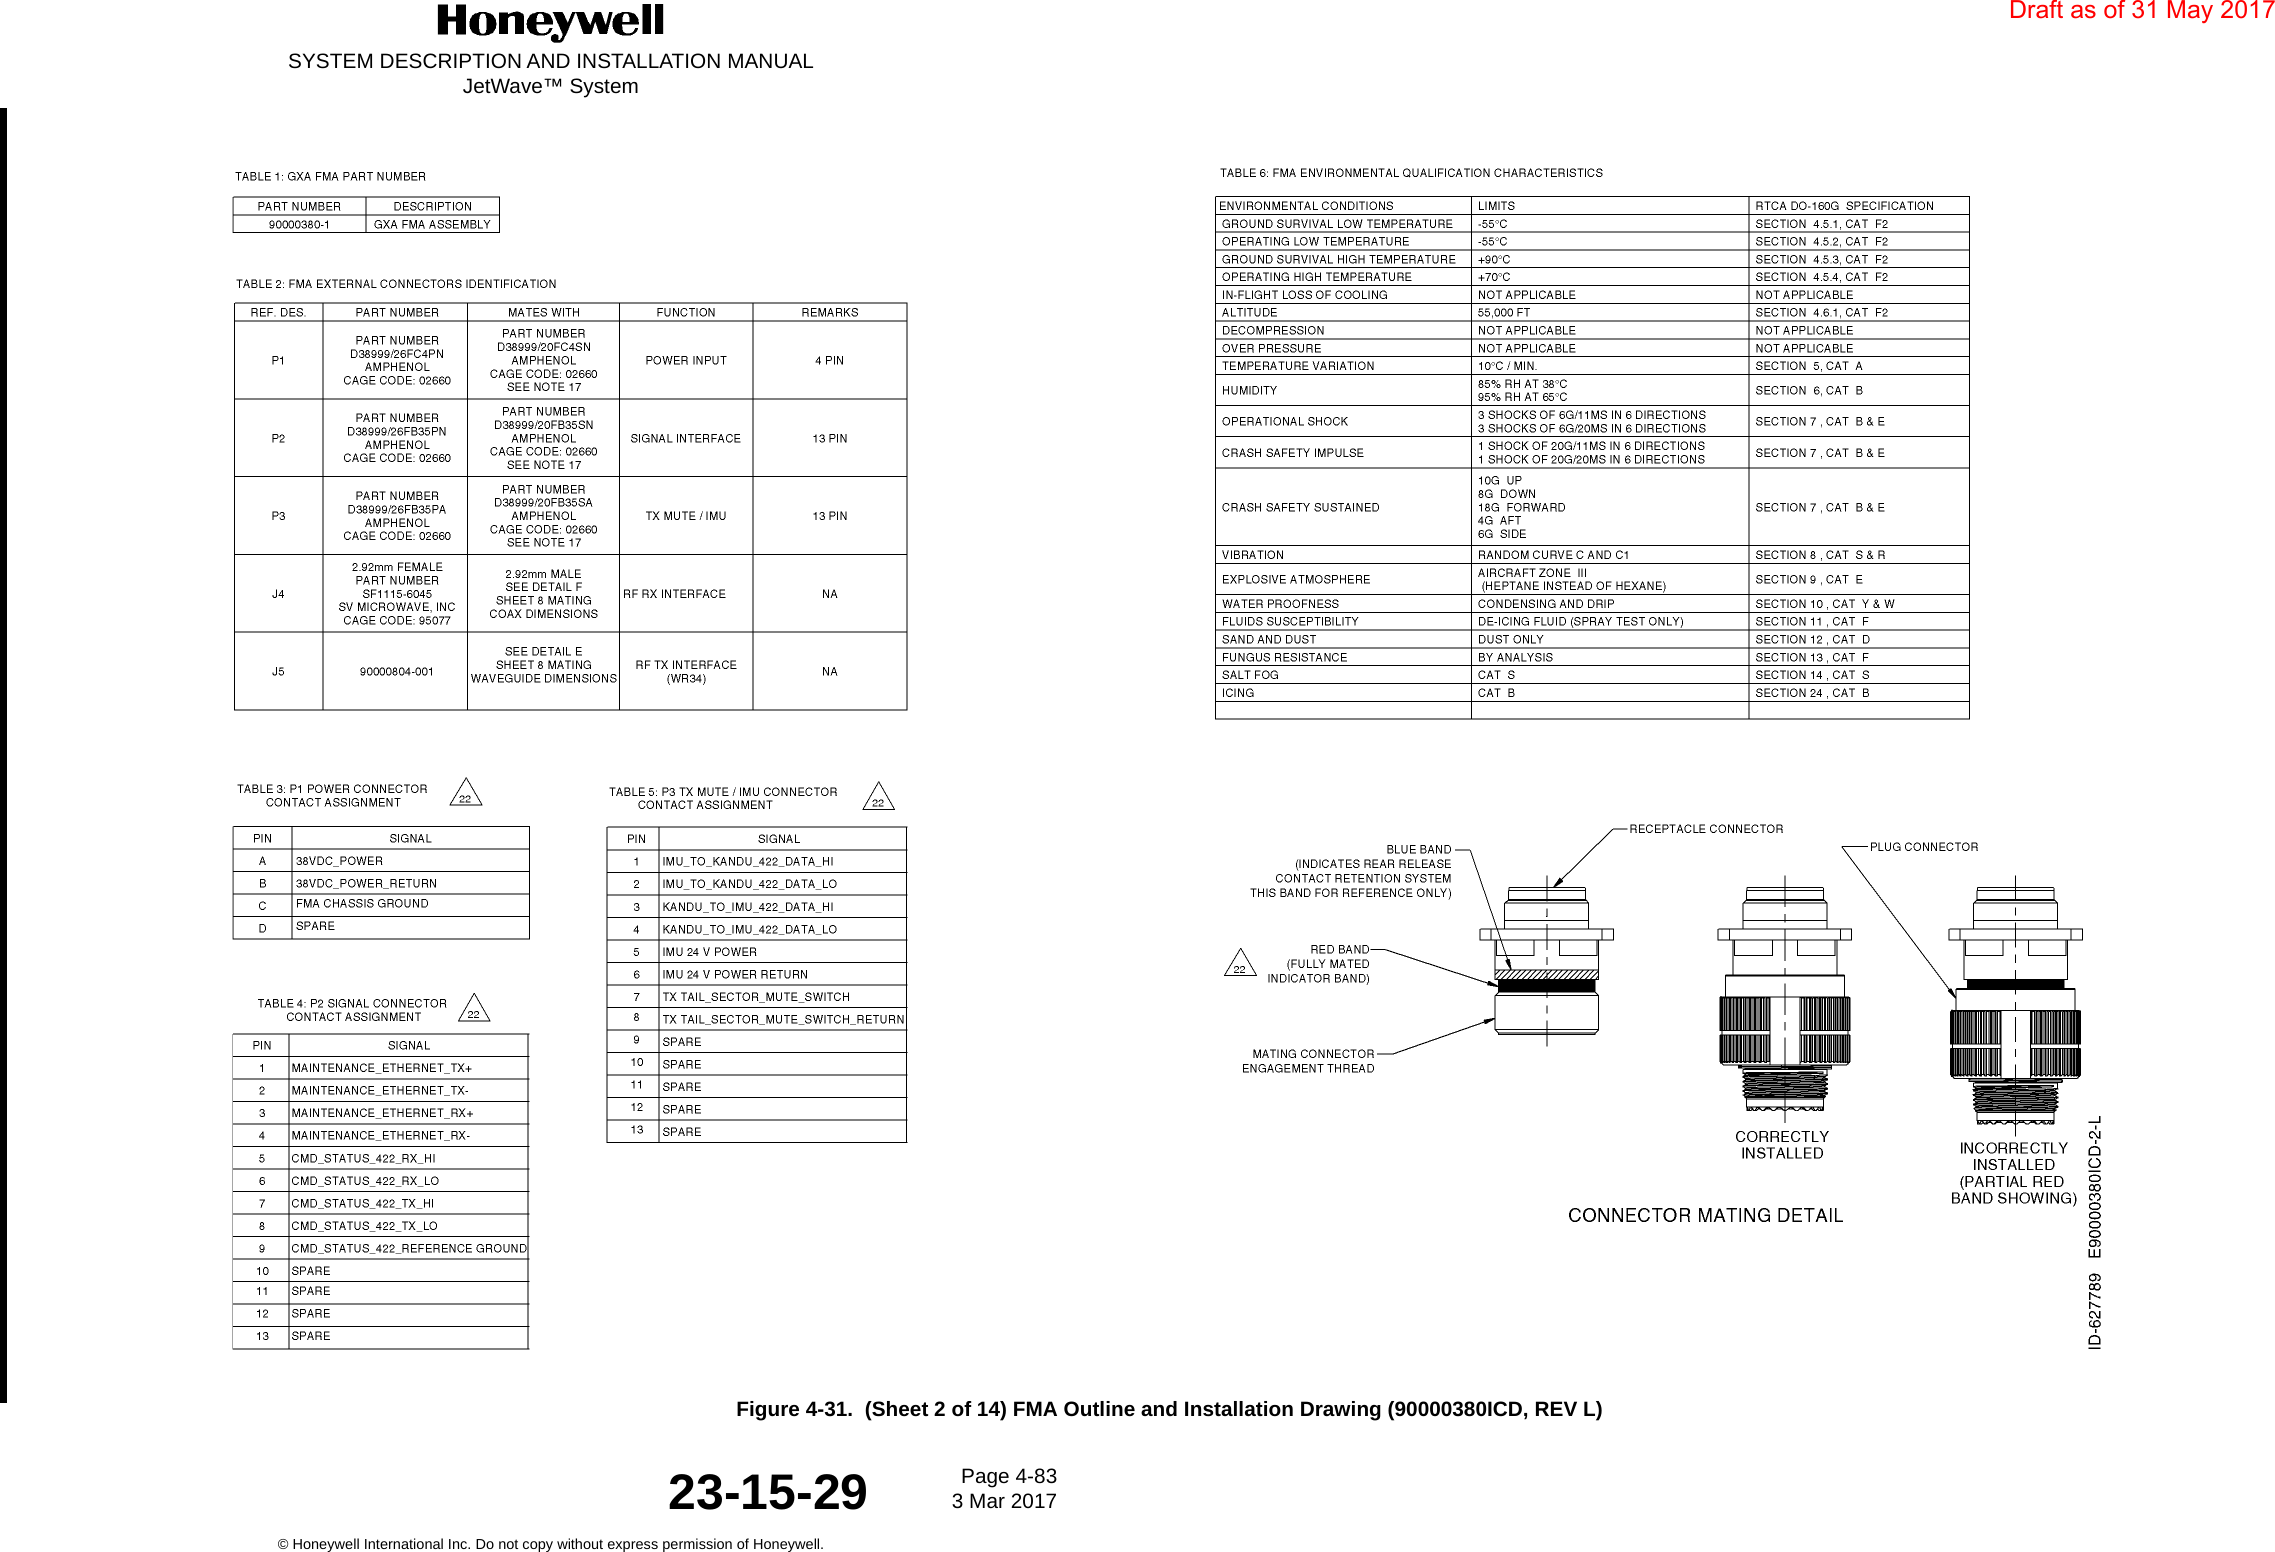 SYSTEM DESCRIPTION AND INSTALLATION MANUALJetWave™ SystemPage 4-83 3 Mar 2017© Honeywell International Inc. Do not copy without express permission of Honeywell.23-15-29Figure 4-31.  (Sheet 2 of 14) FMA Outline and Installation Drawing (90000380ICD, REV L)Draft as of 31 May 2017